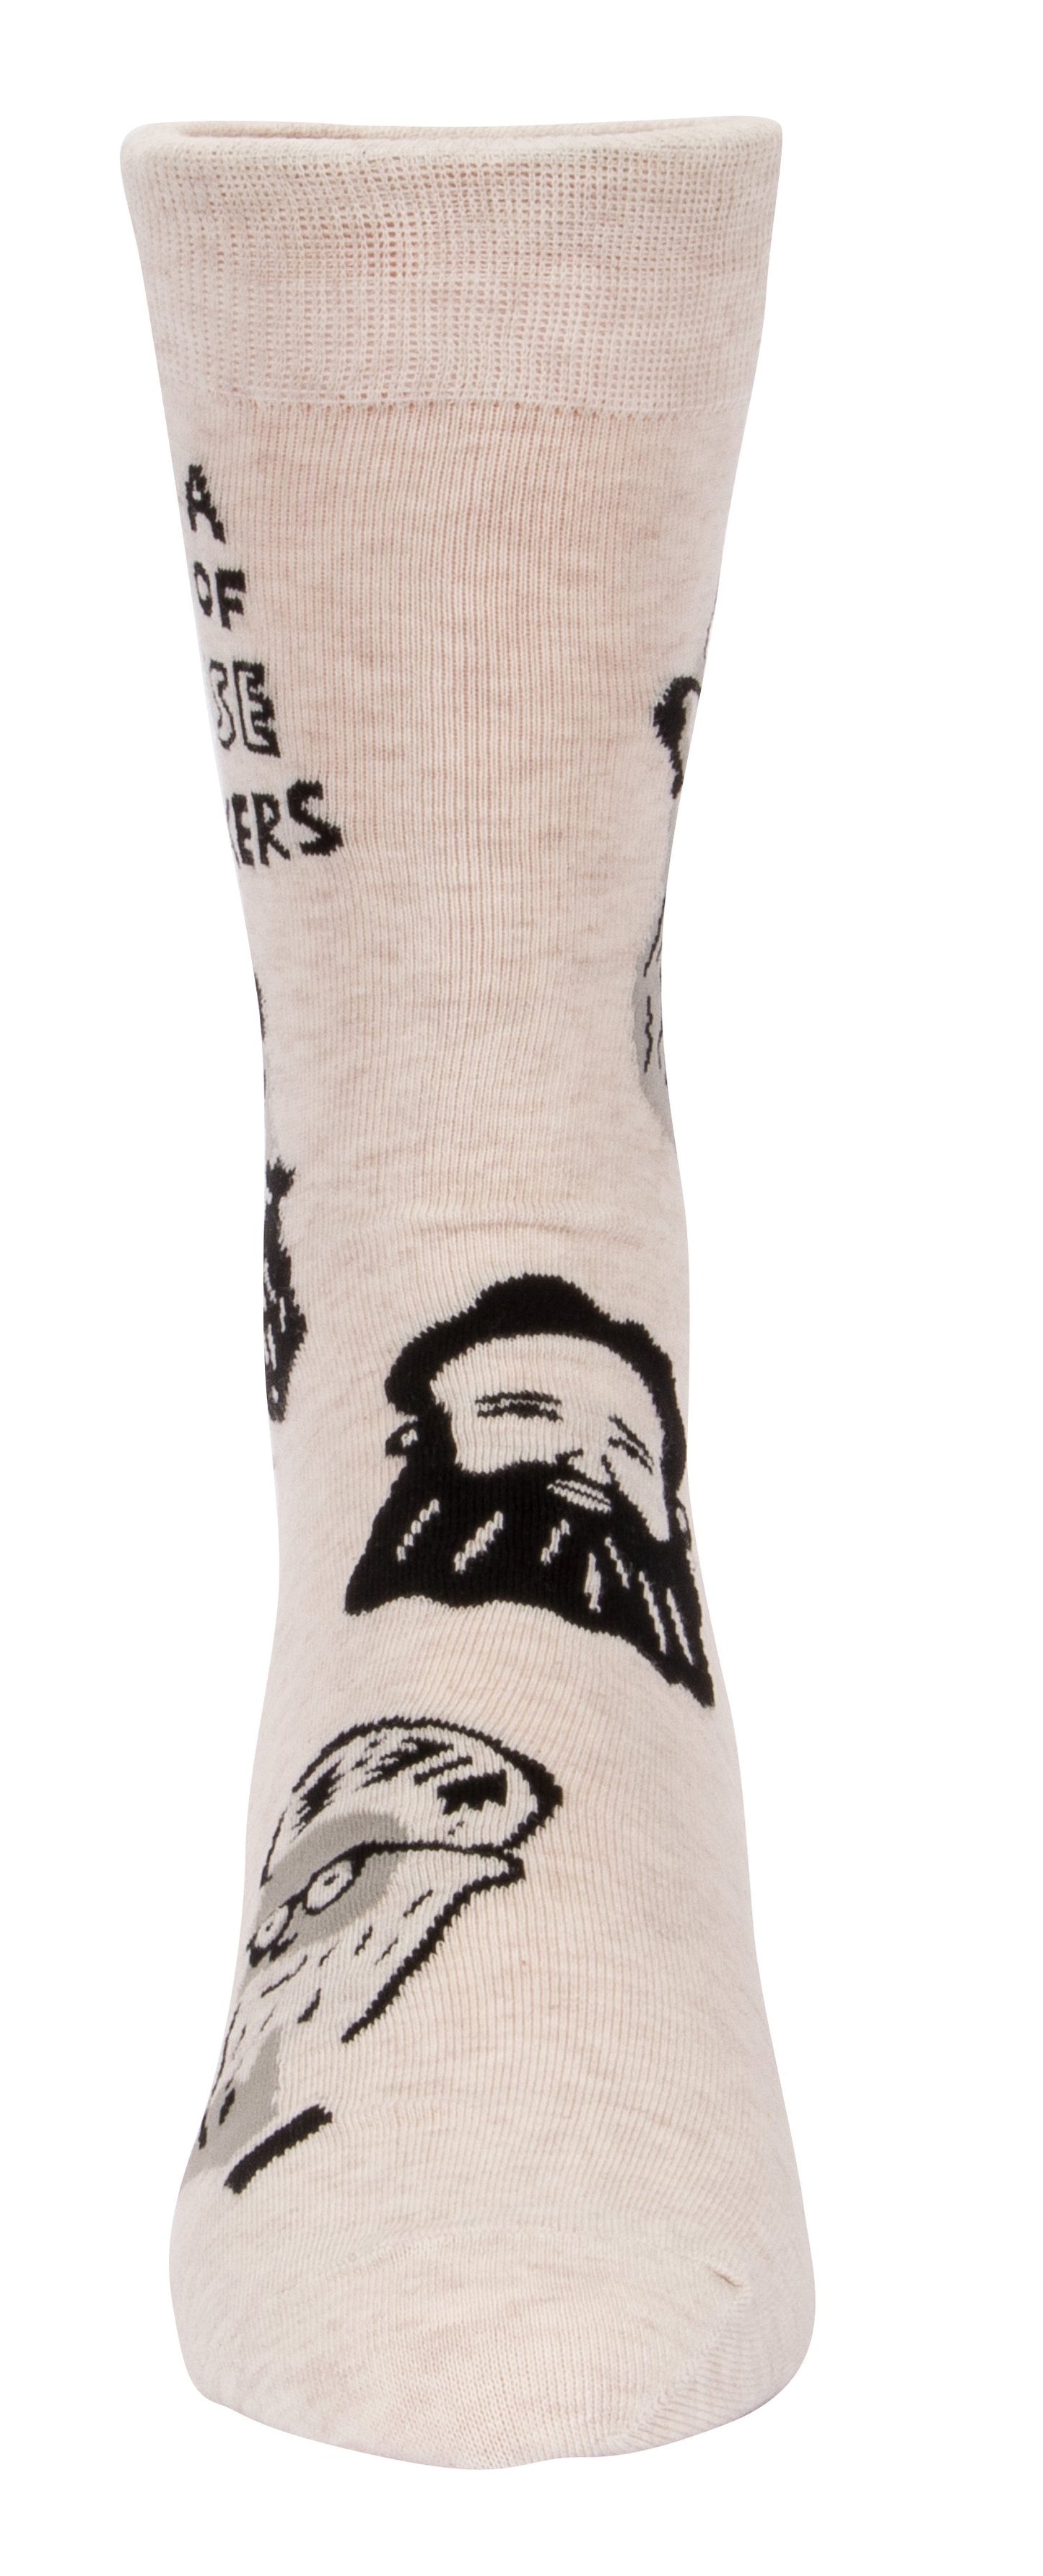 Blue Q - Men's Crew Socks - Get A Load Of These Whiskers